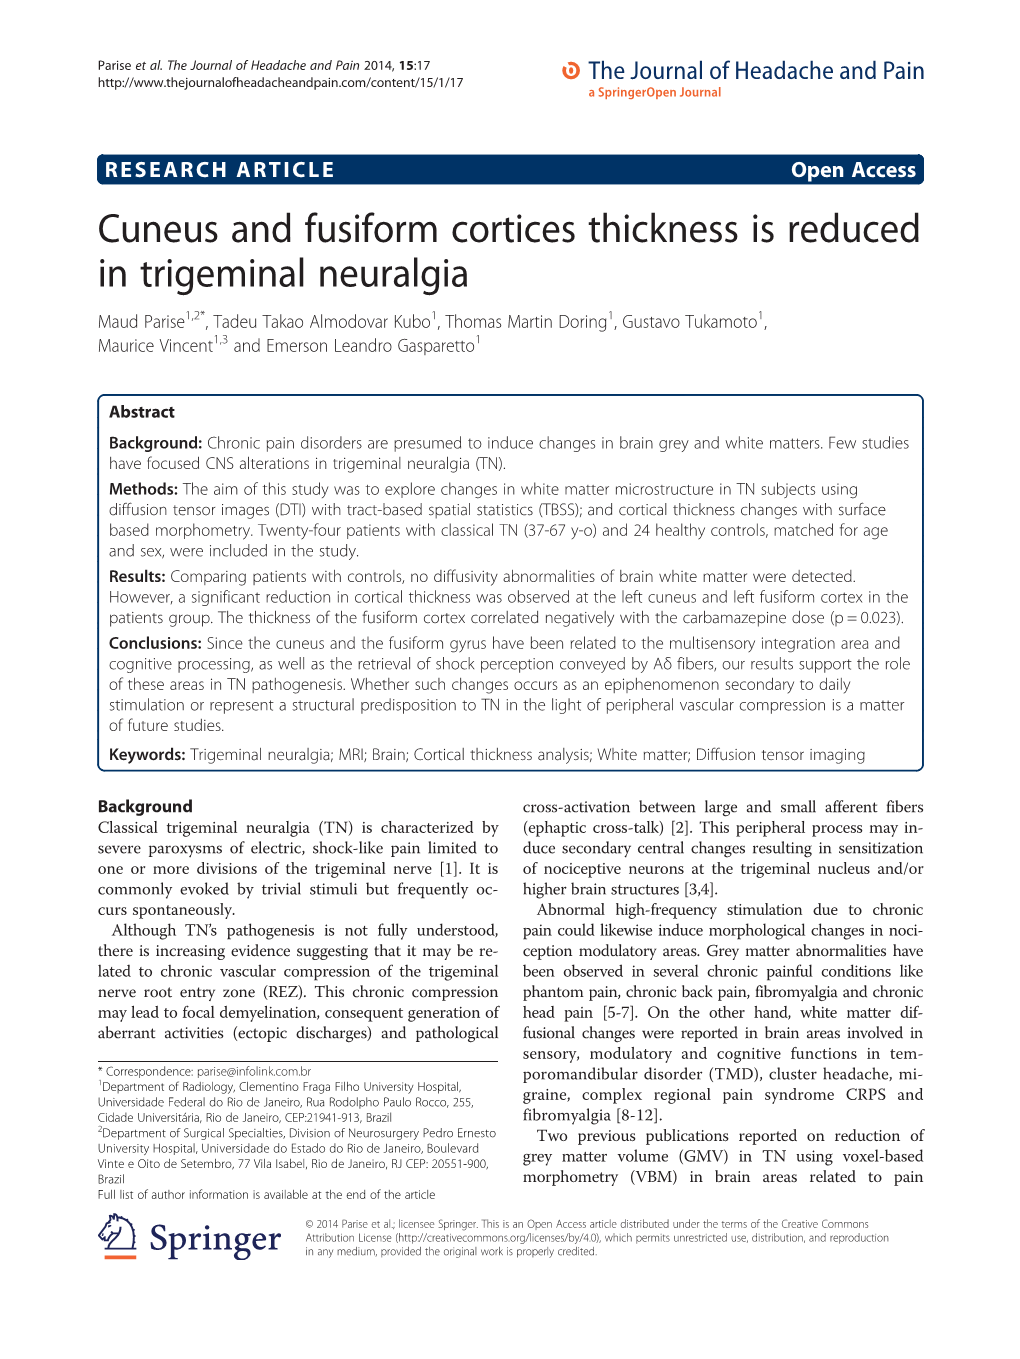 Cuneus and Fusiform Cortices Thickness Is Reduced in Trigeminal